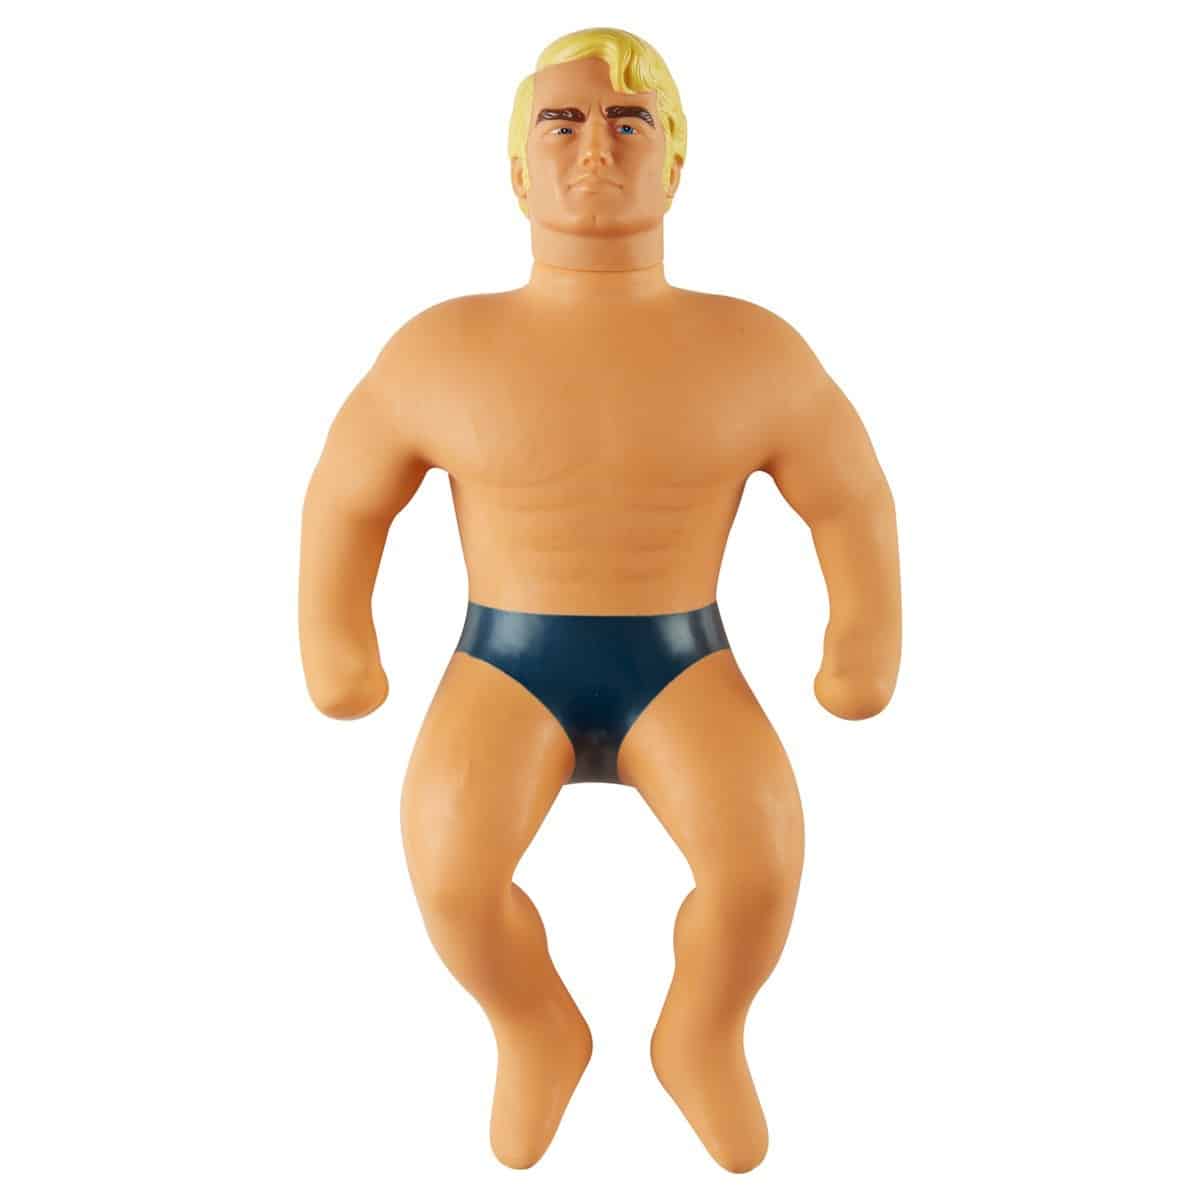 The Original Stretch Armstrong - Giant Figure